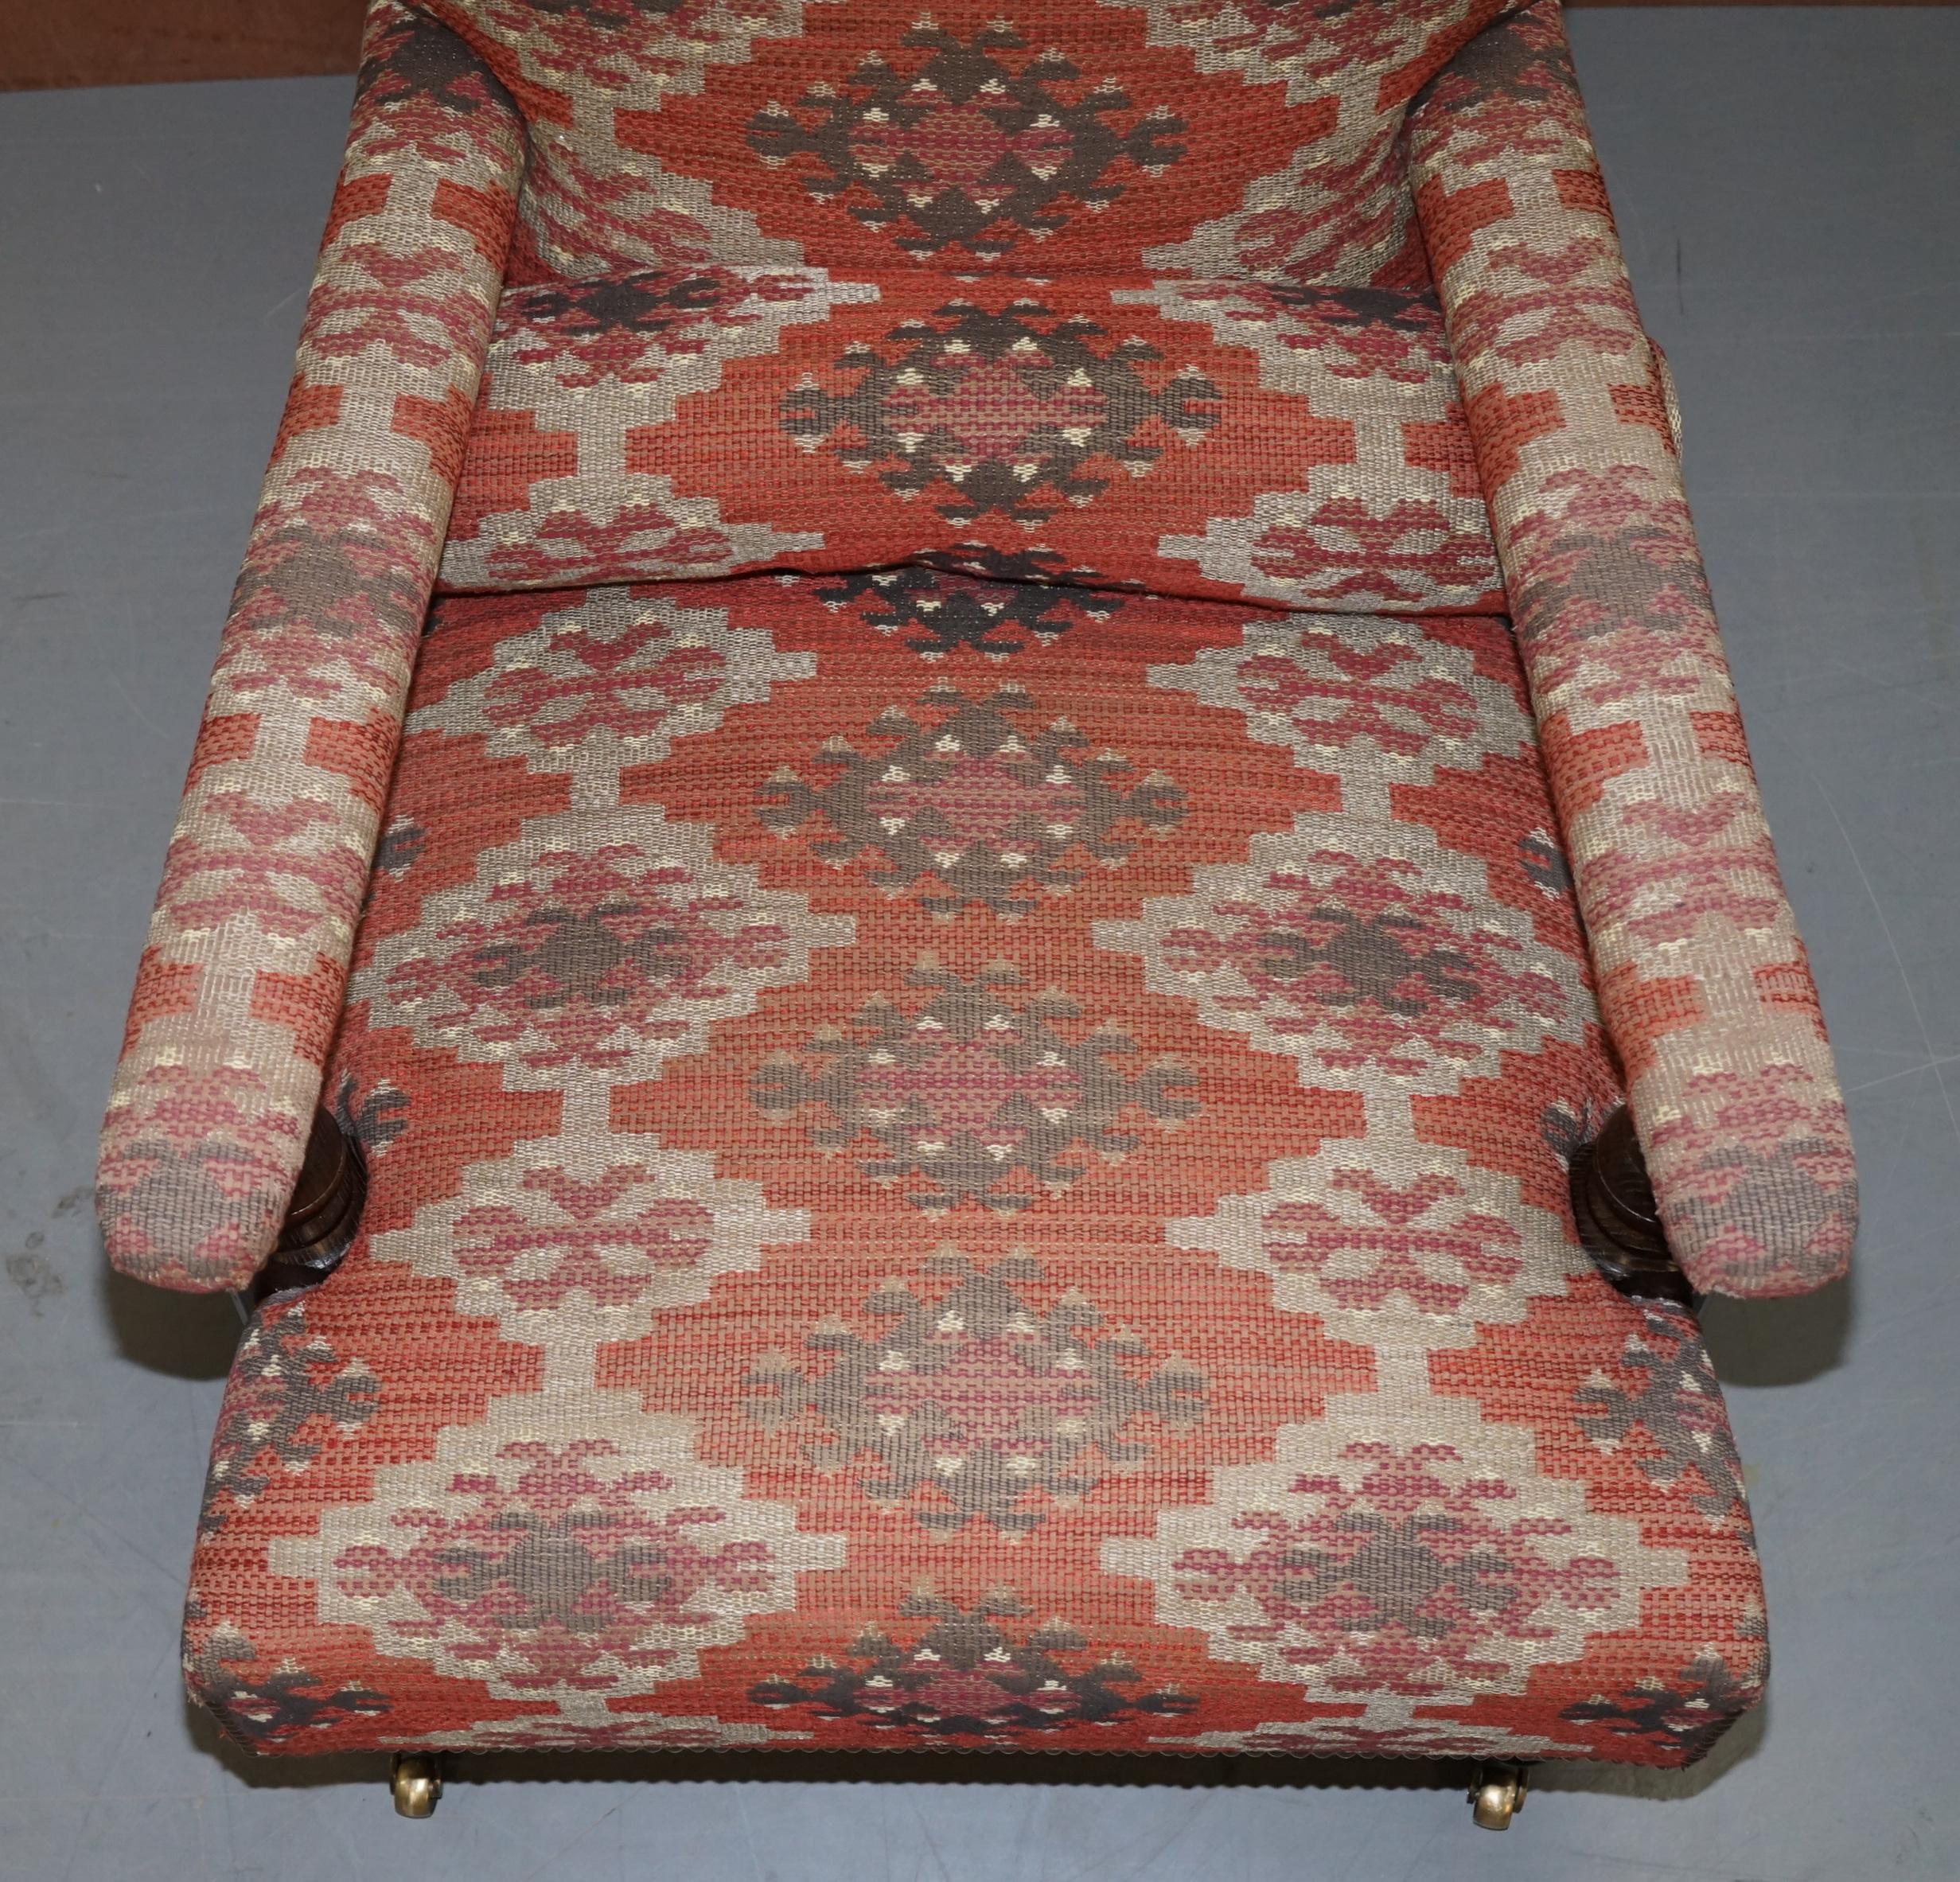 English Pair of George Smith Kilim Upholstered Edwardian Library Armchairs